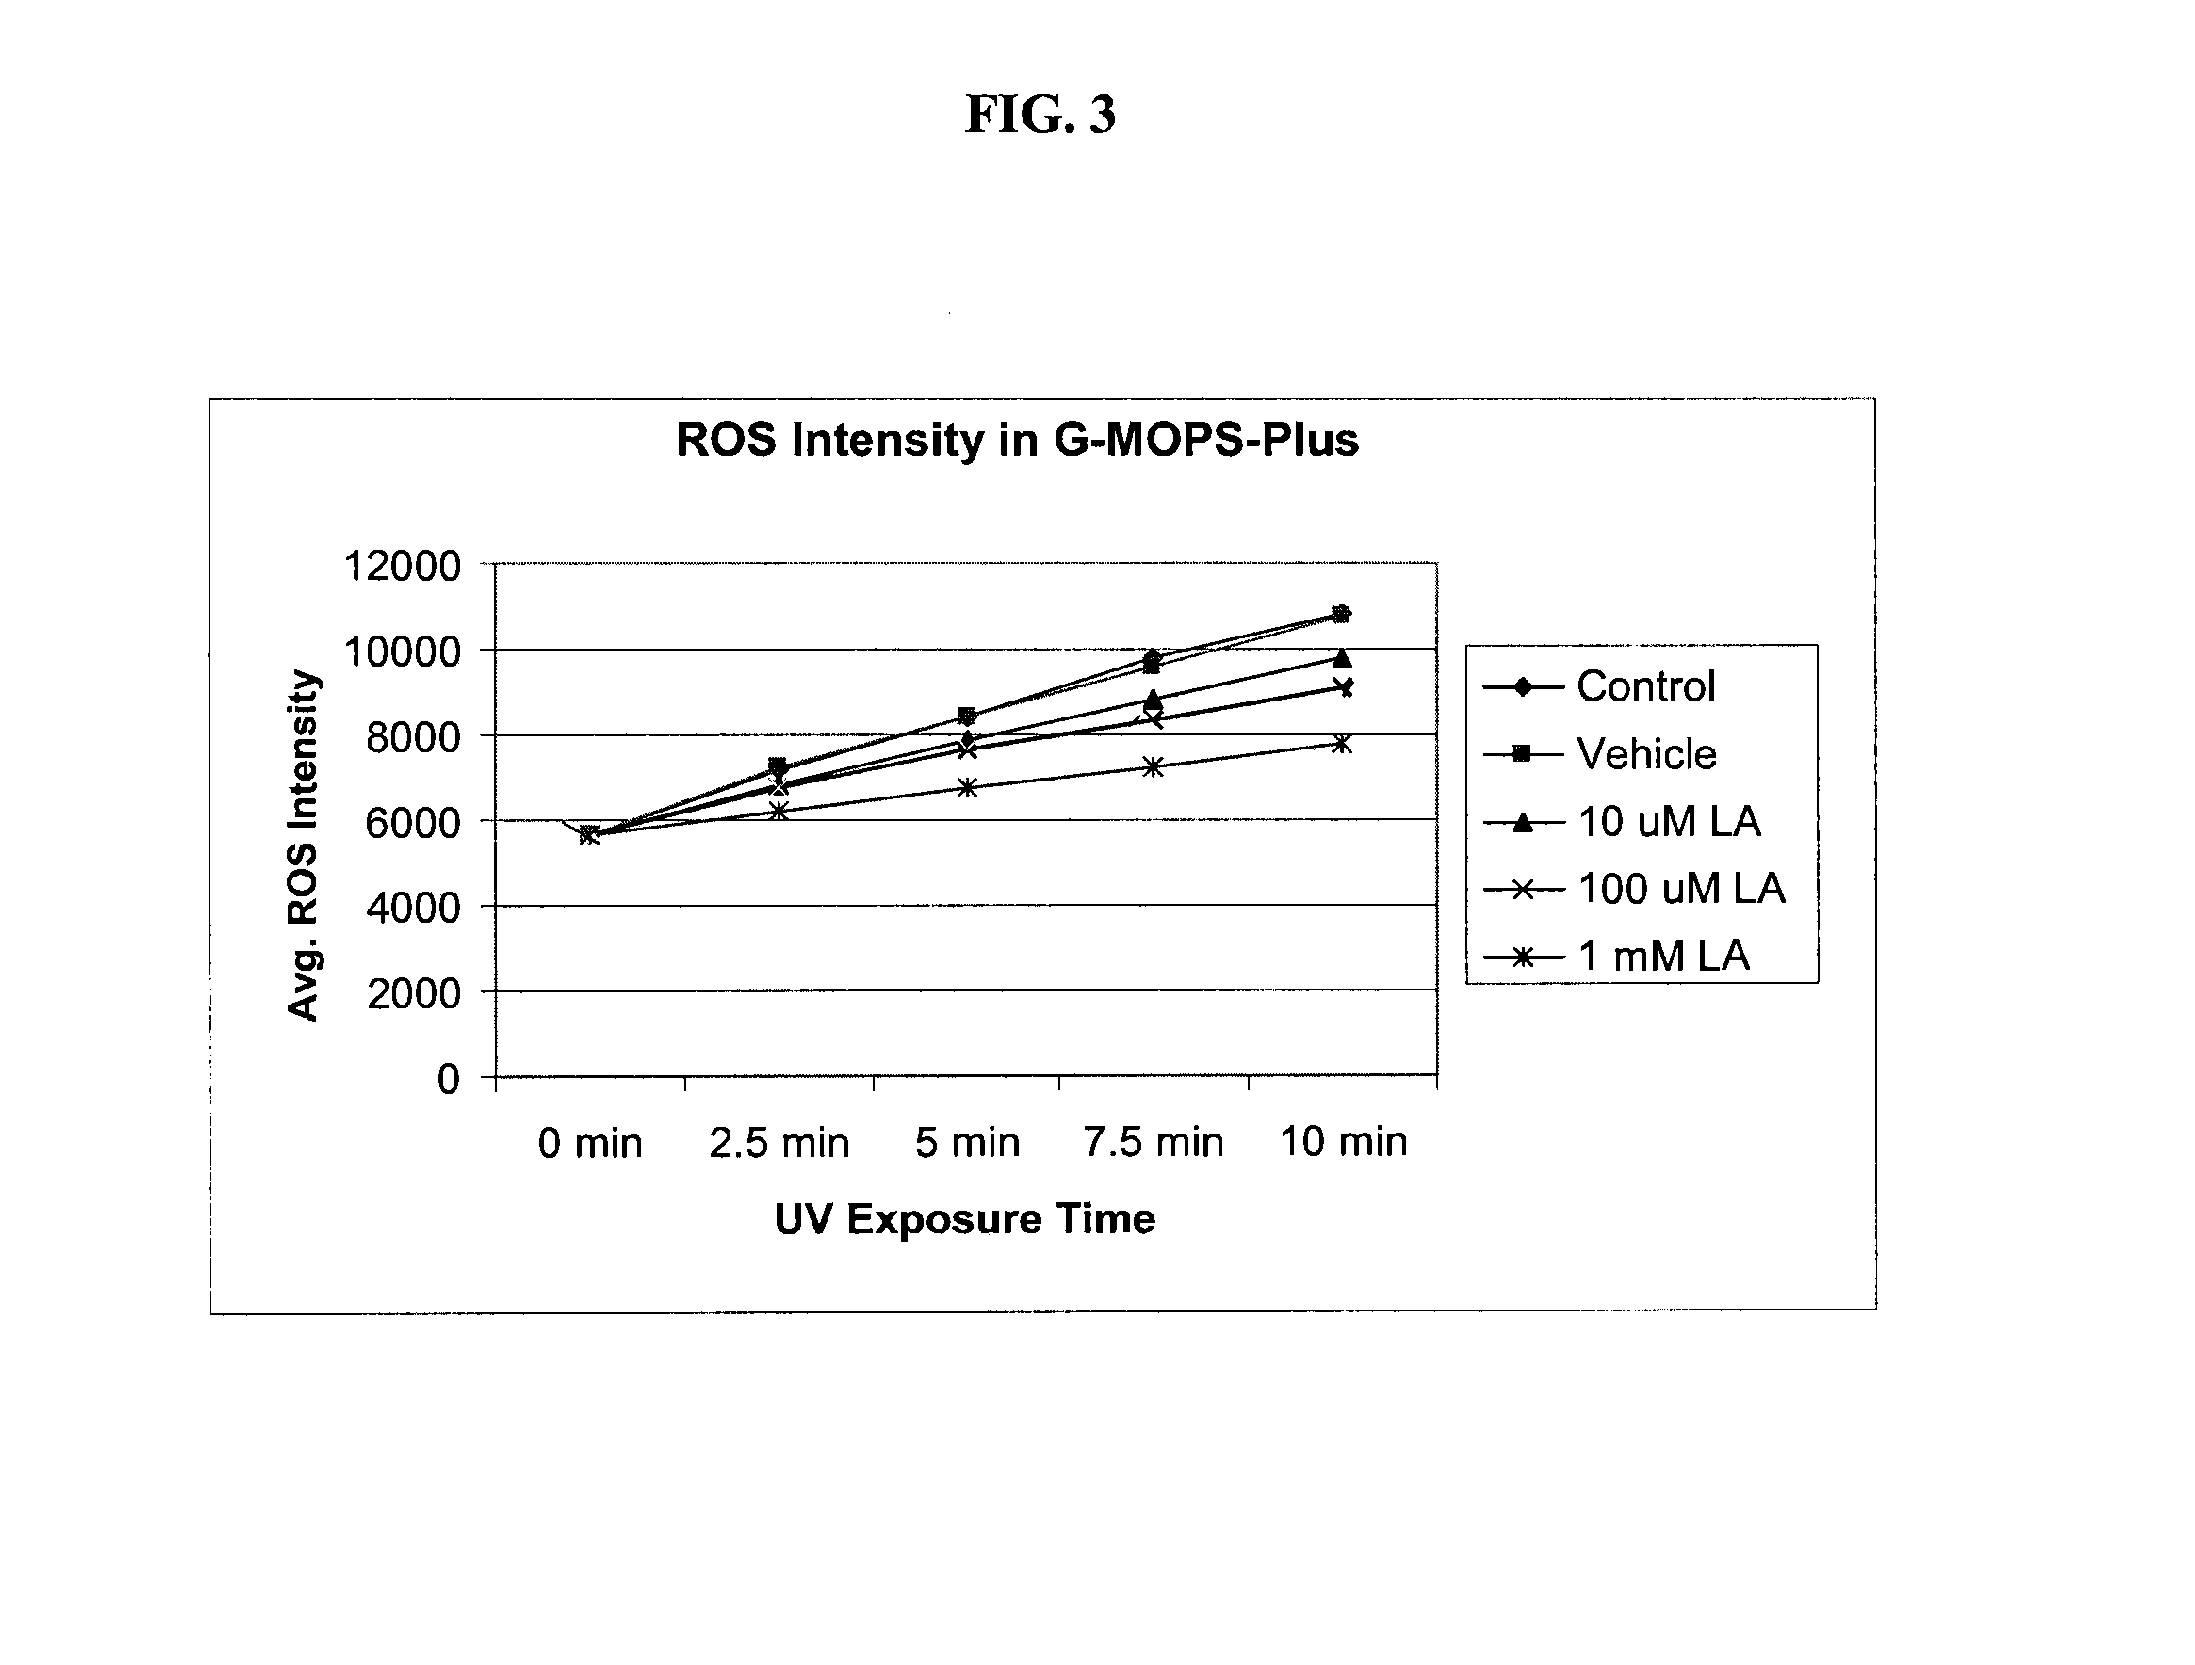 Culture media for developmental cells containing elevated concentrations of lipoic acid